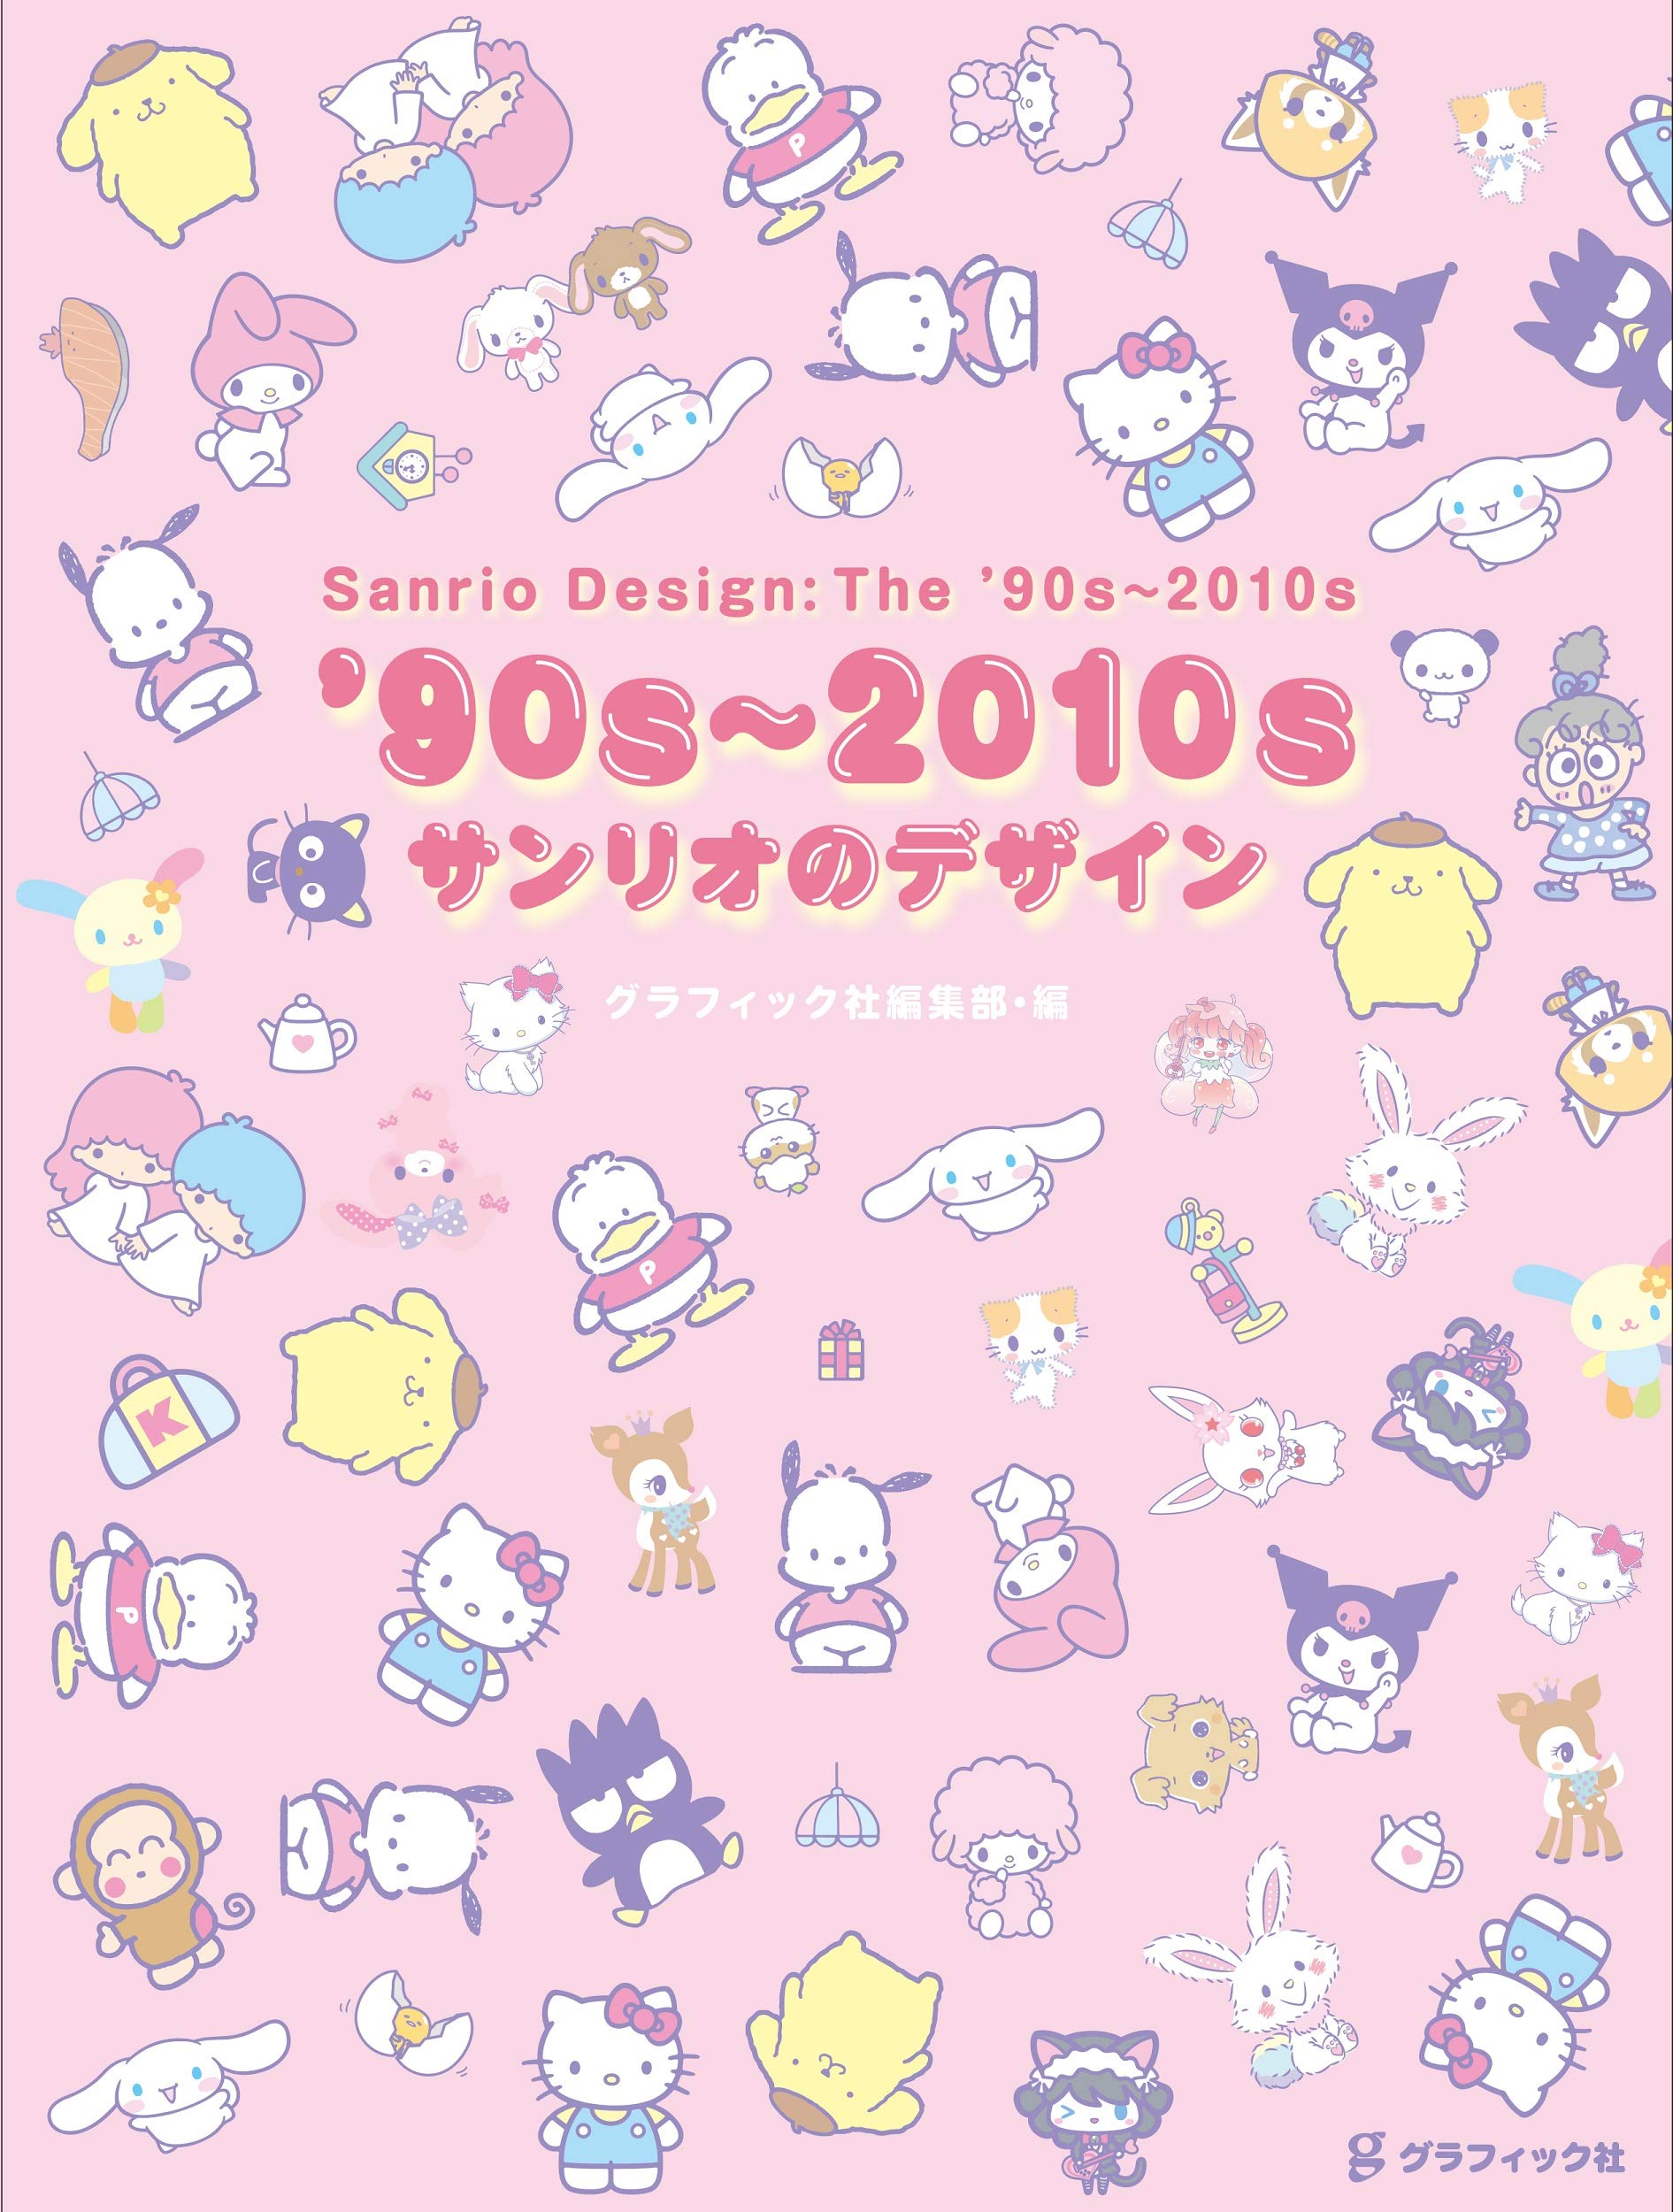 Sanrio Design The ’90s & 2010s – Japanese character – Japanese Creative Bookstore